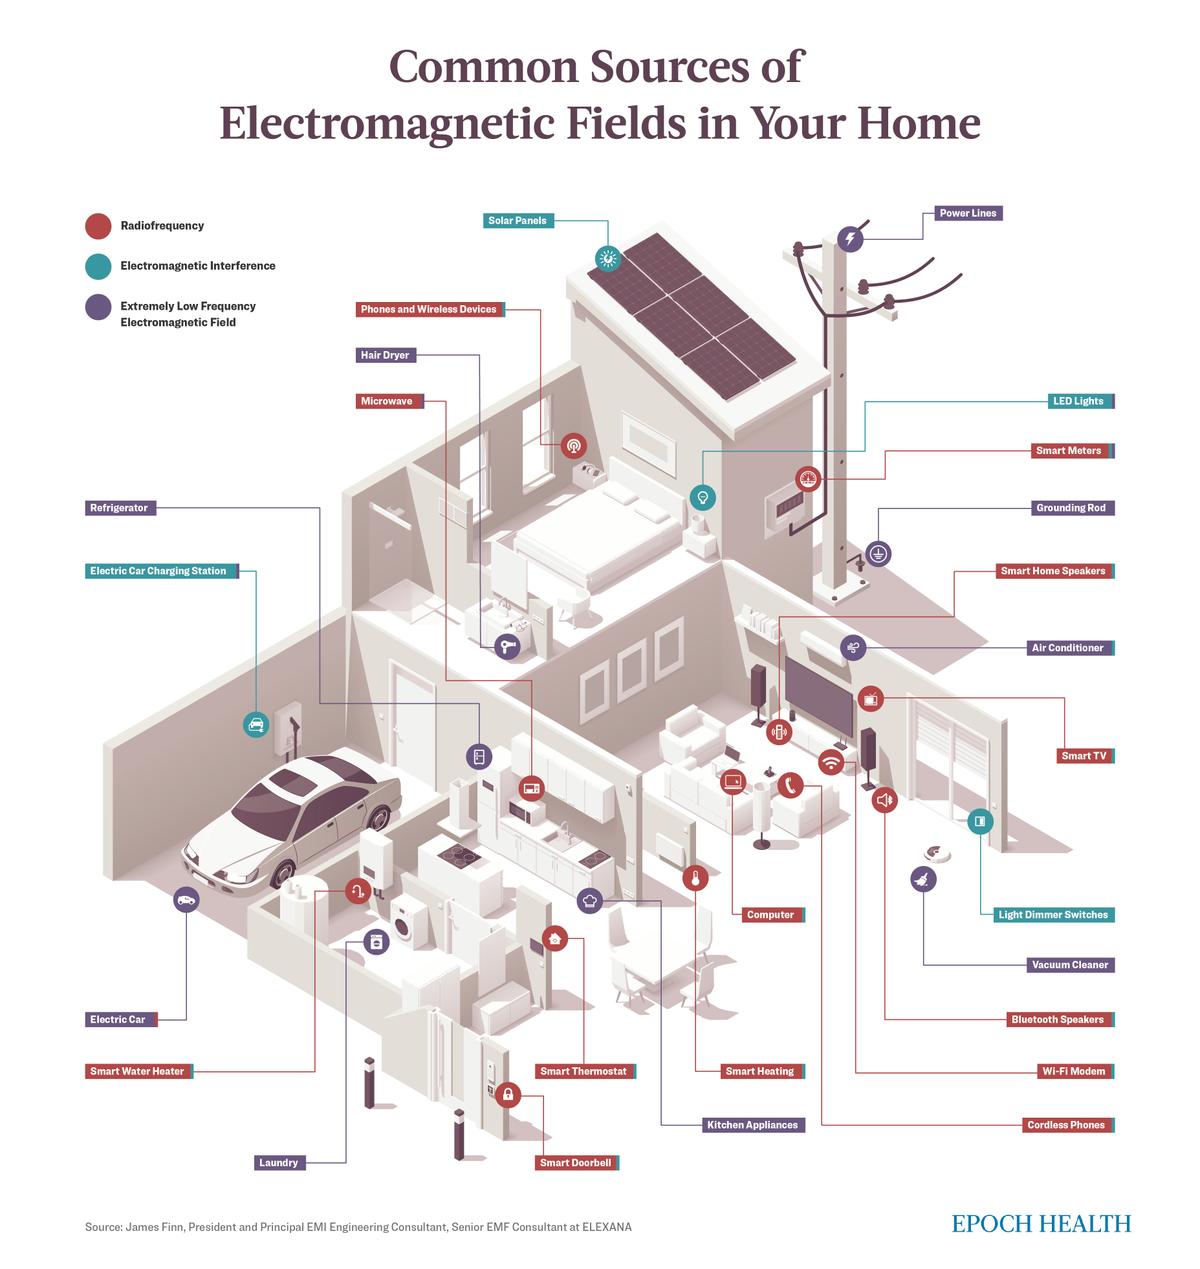  Sources of EMF in the home (The Epoch Times)